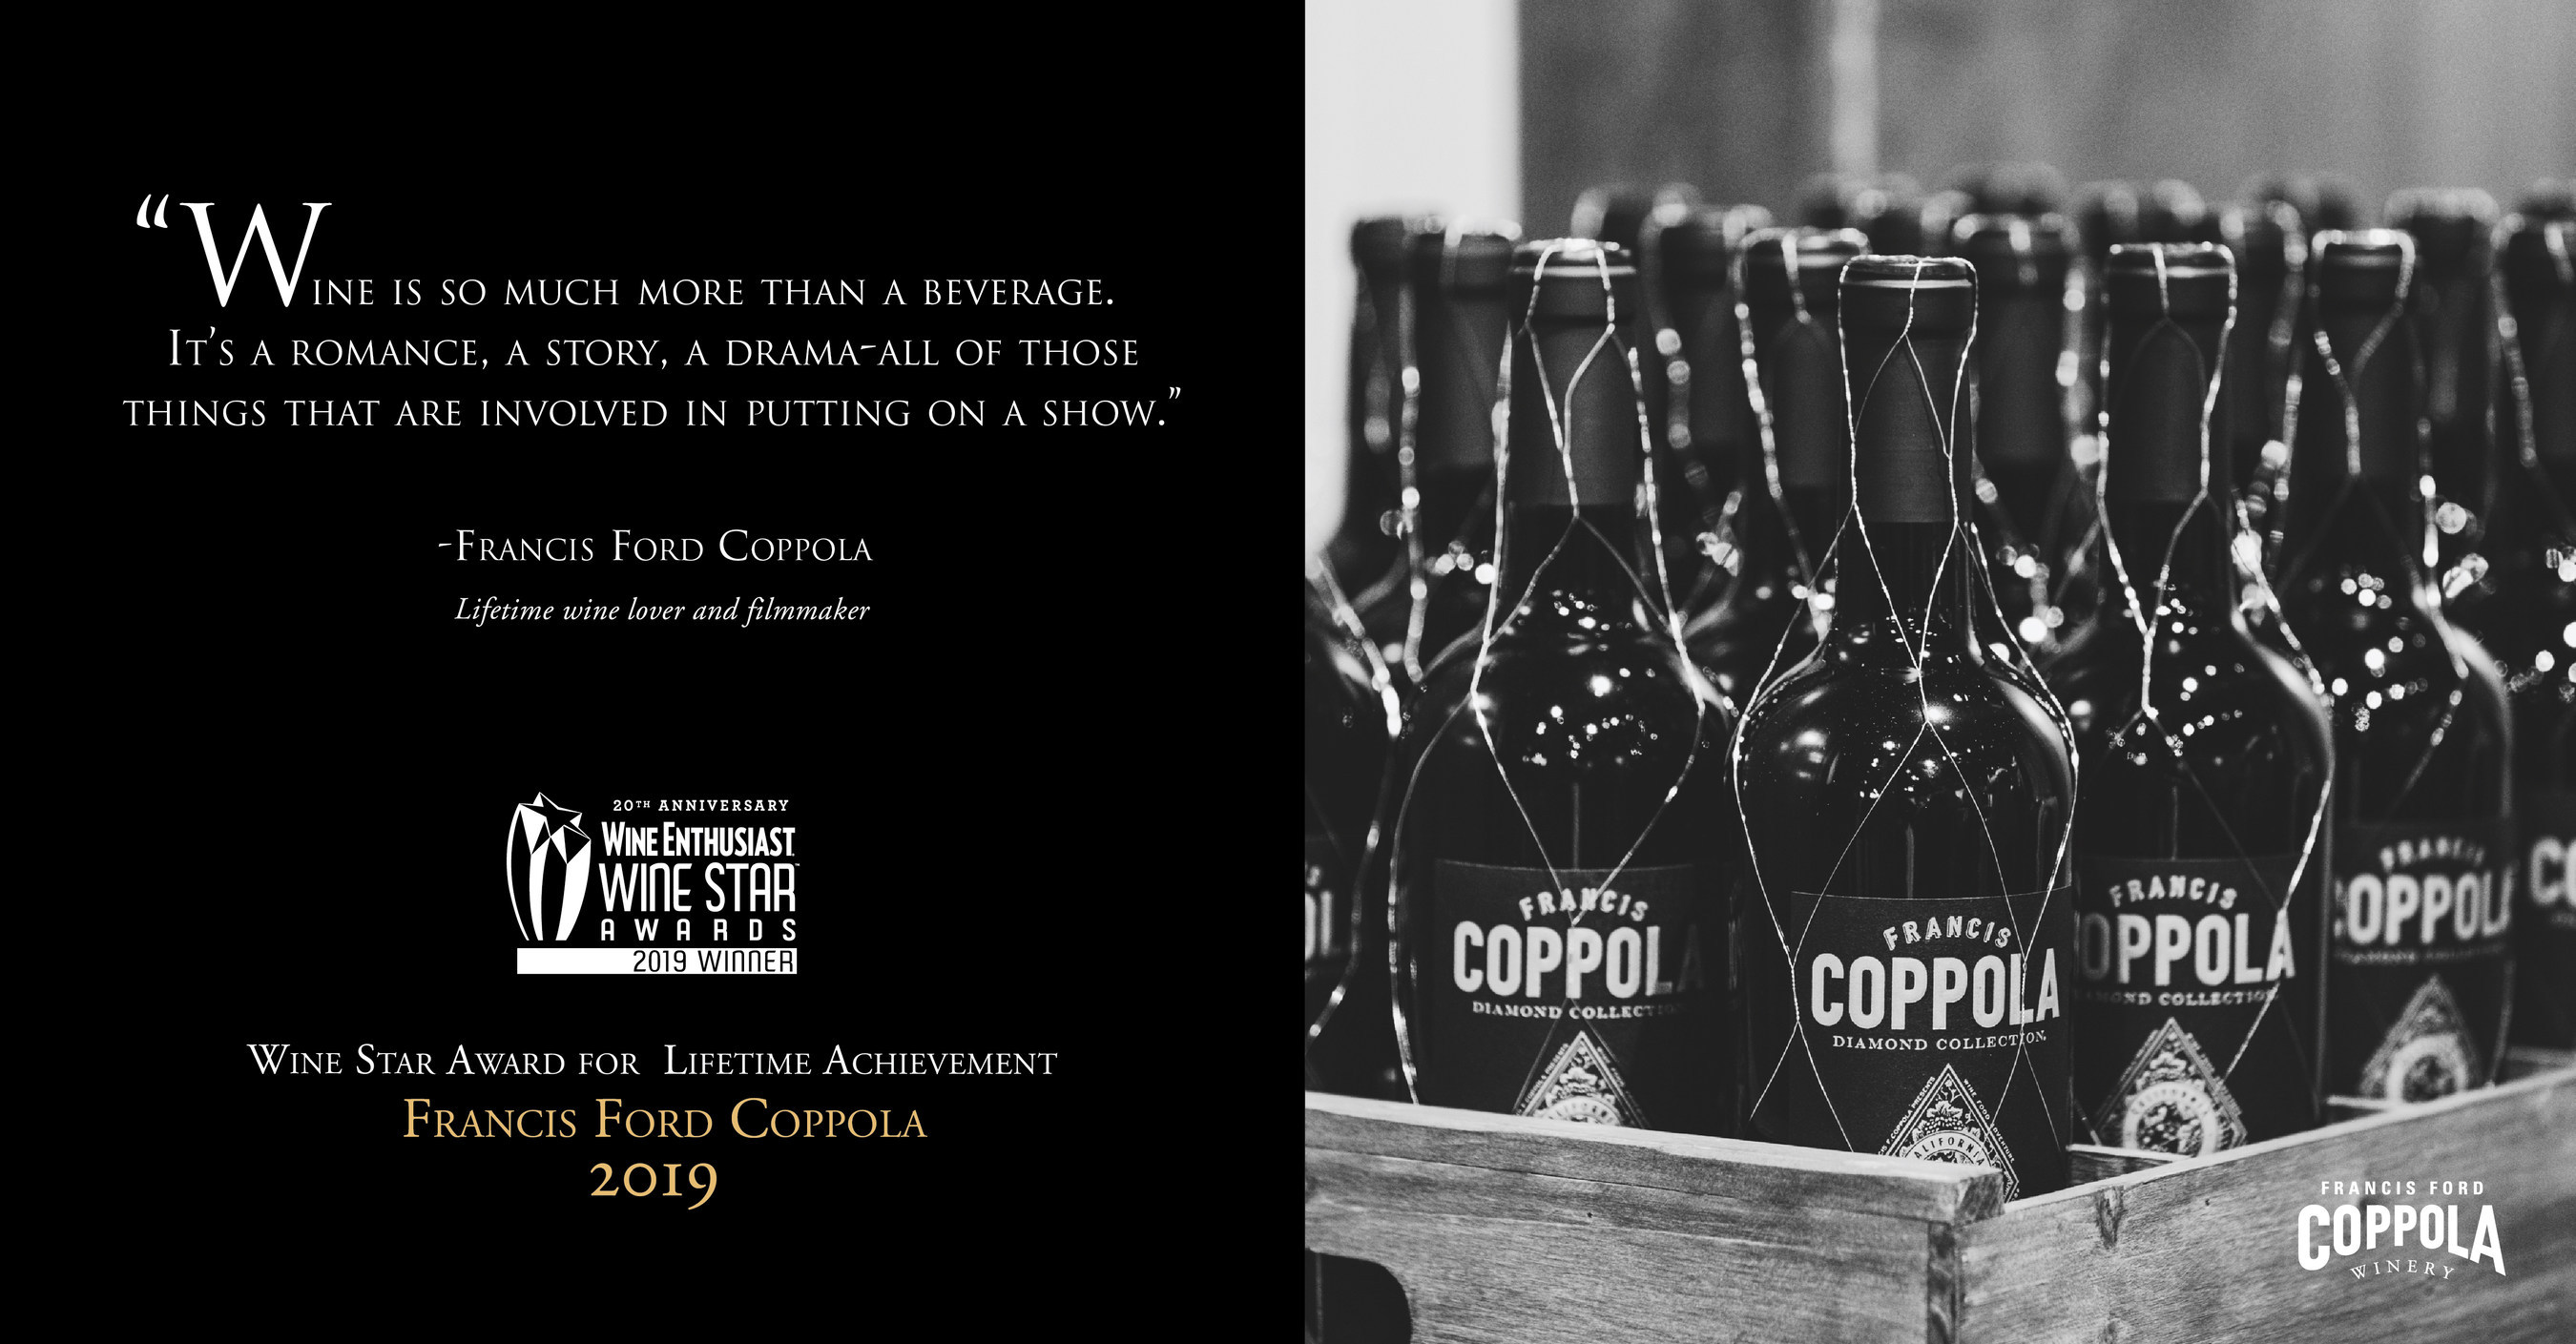 Wine is so much more than a beverage. Its a romance, a story, a drama. All of those things that are involved in putting on a show. - Francis Ford Coppola